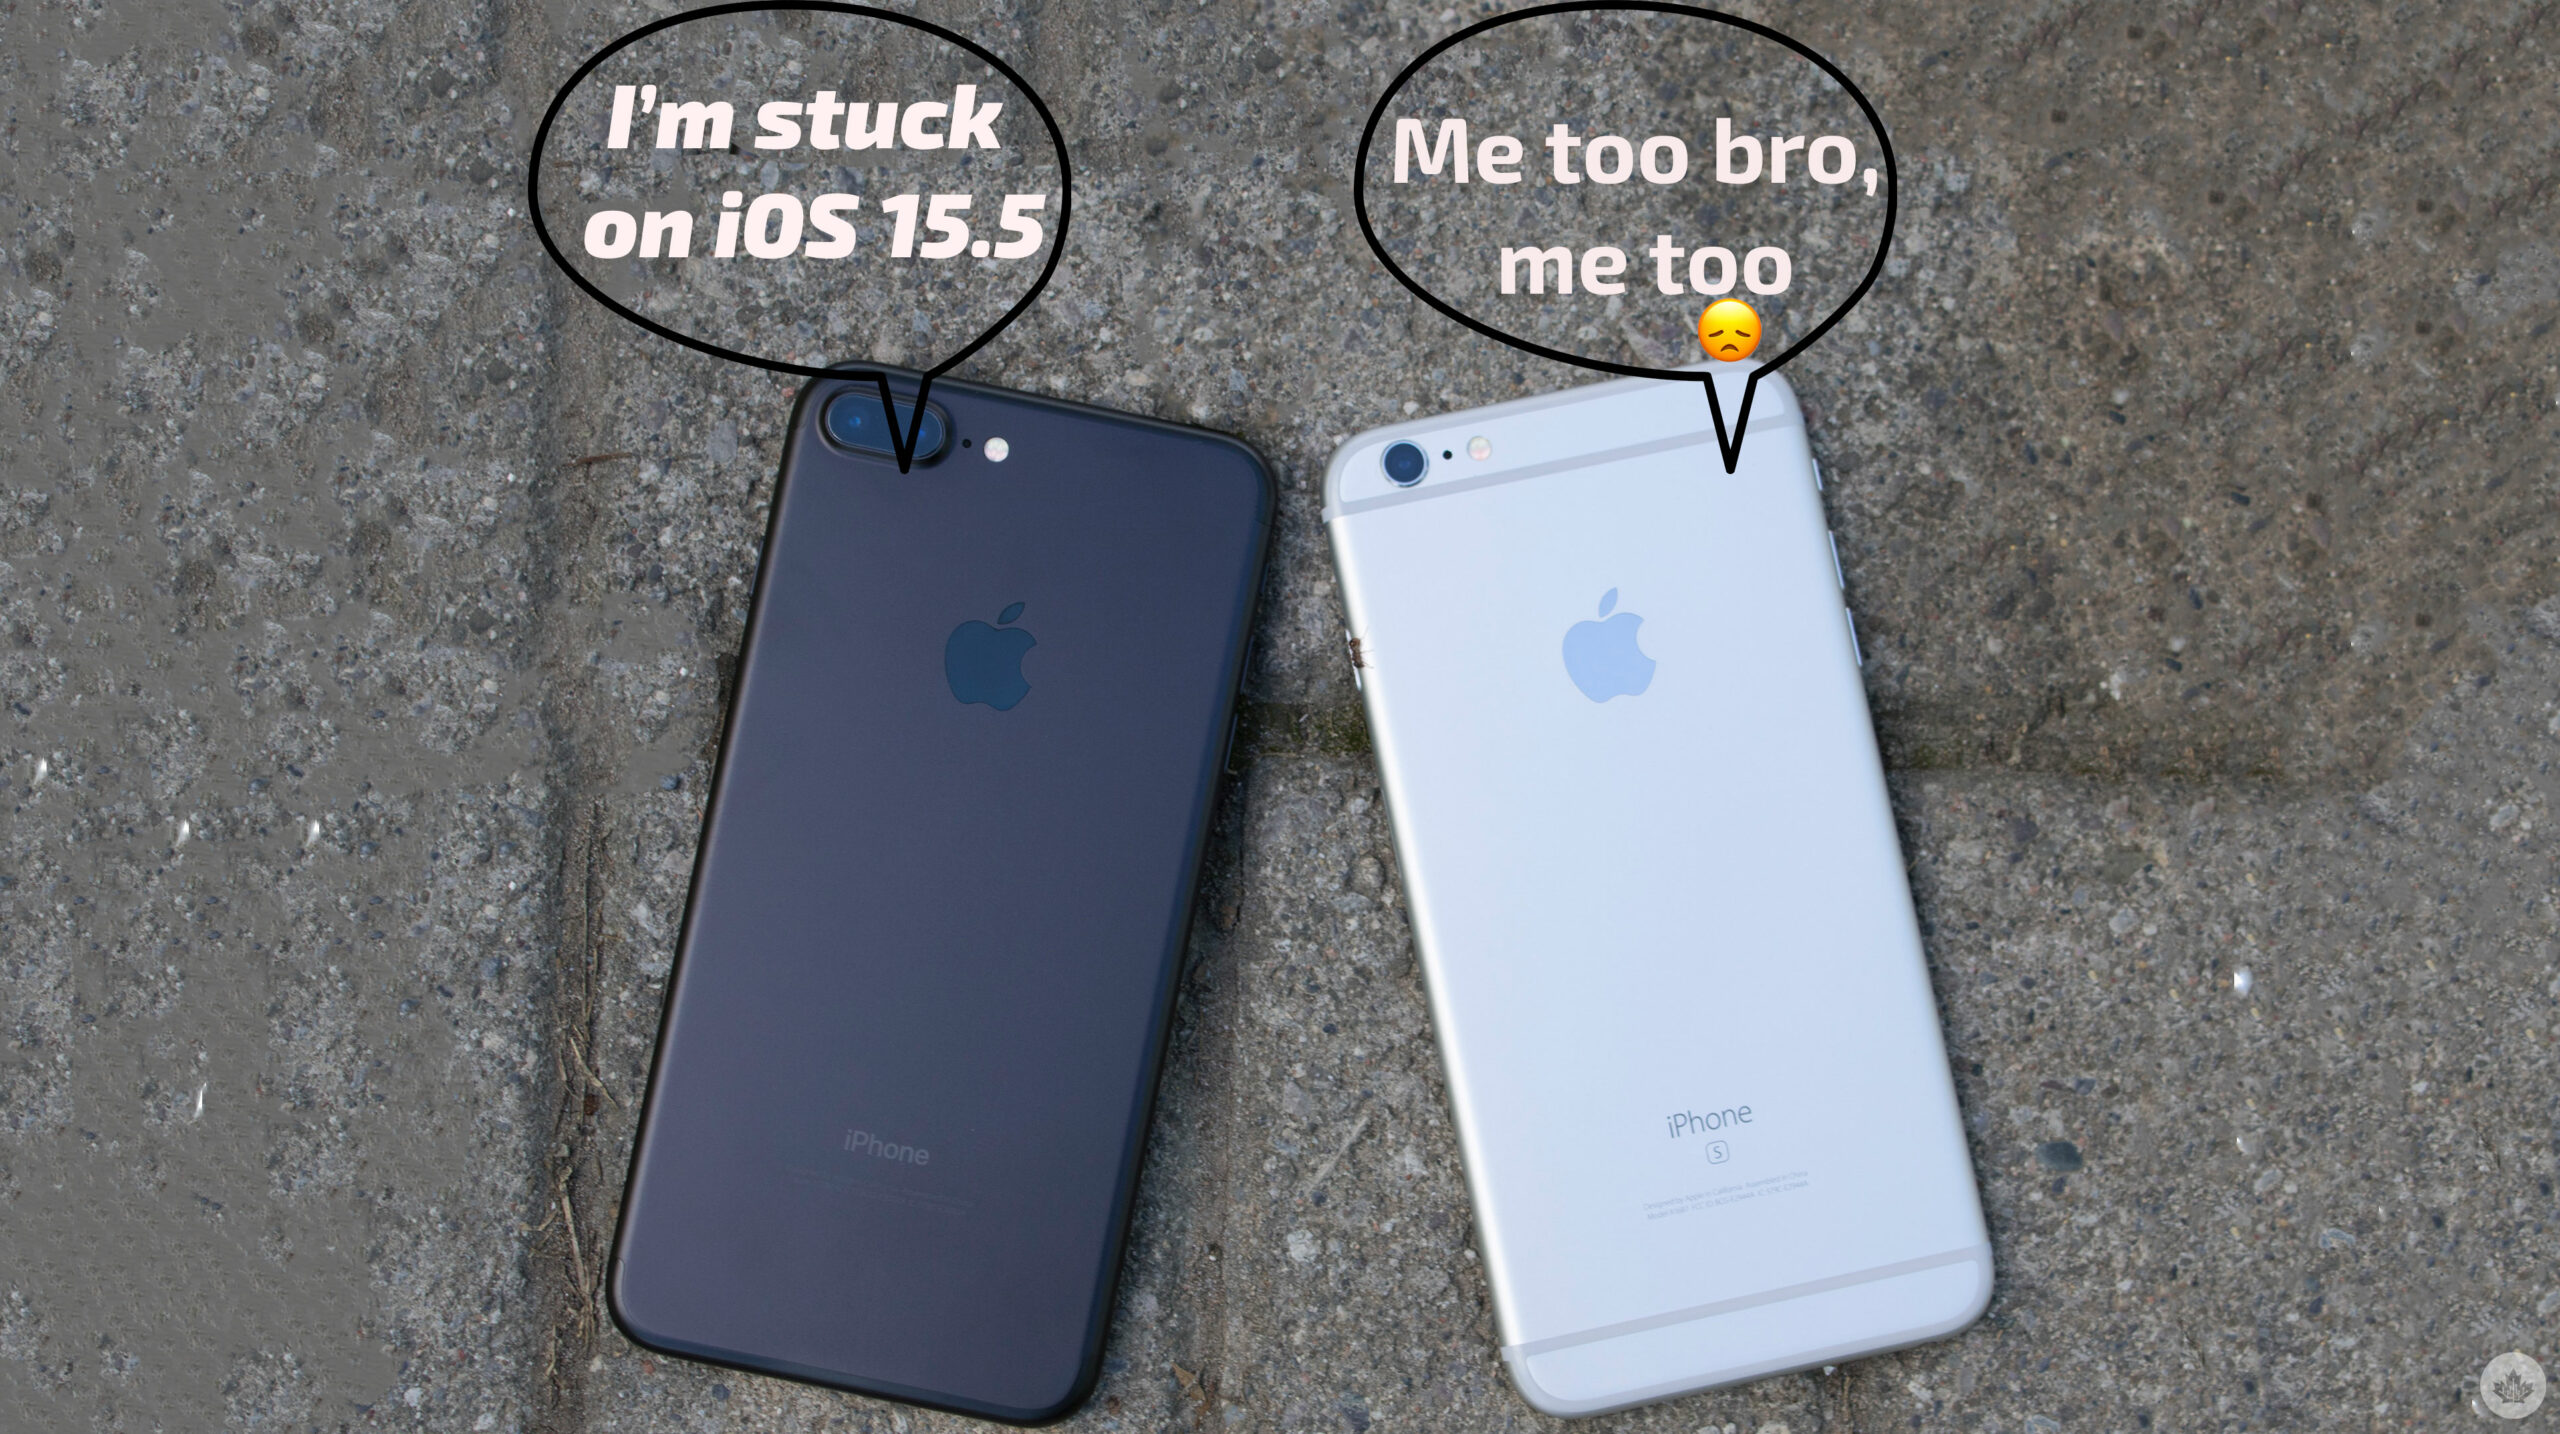 Will iPhone 7 still work after iOS 16?